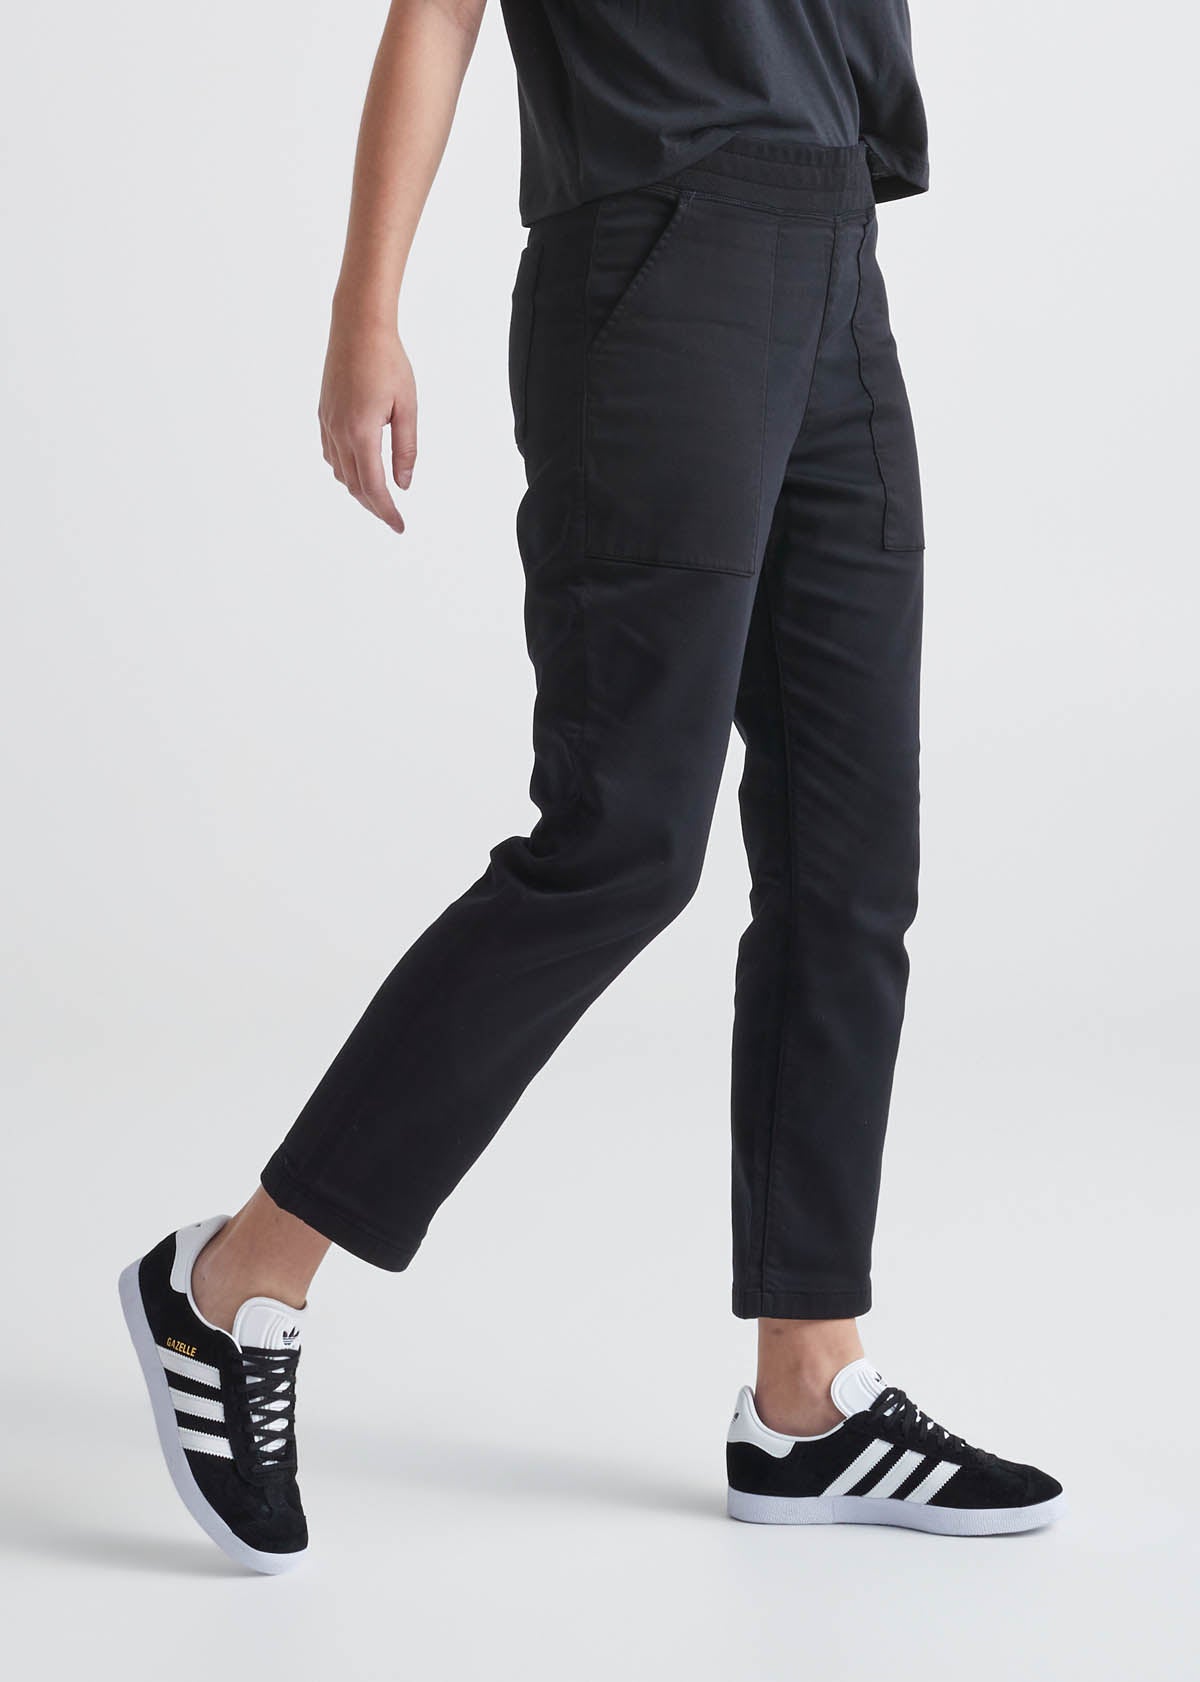 Travel Pants & Jeans for Women – Tagged waist-l